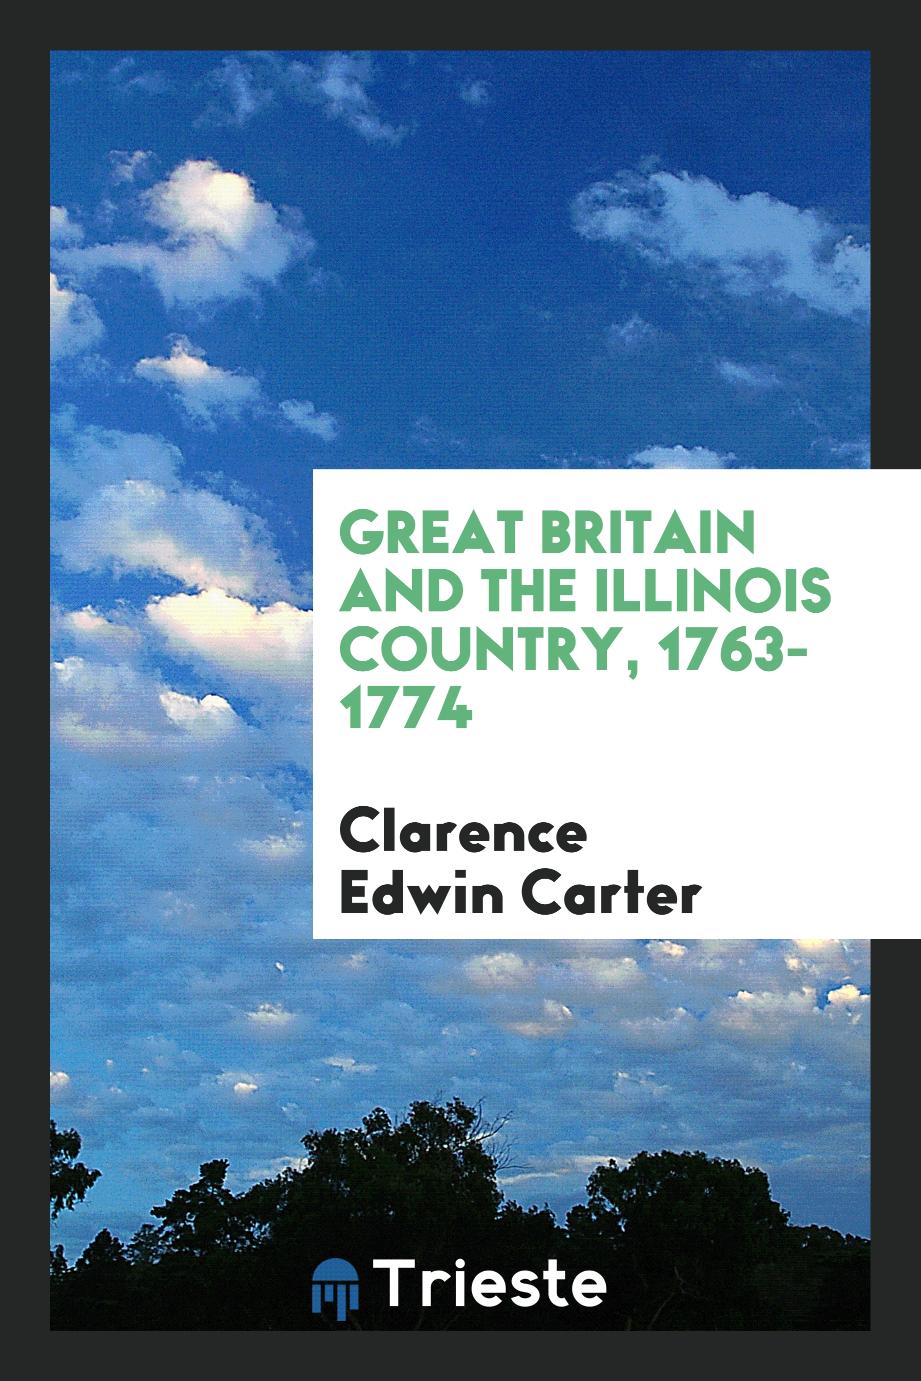 Great Britain and the Illinois country, 1763-1774